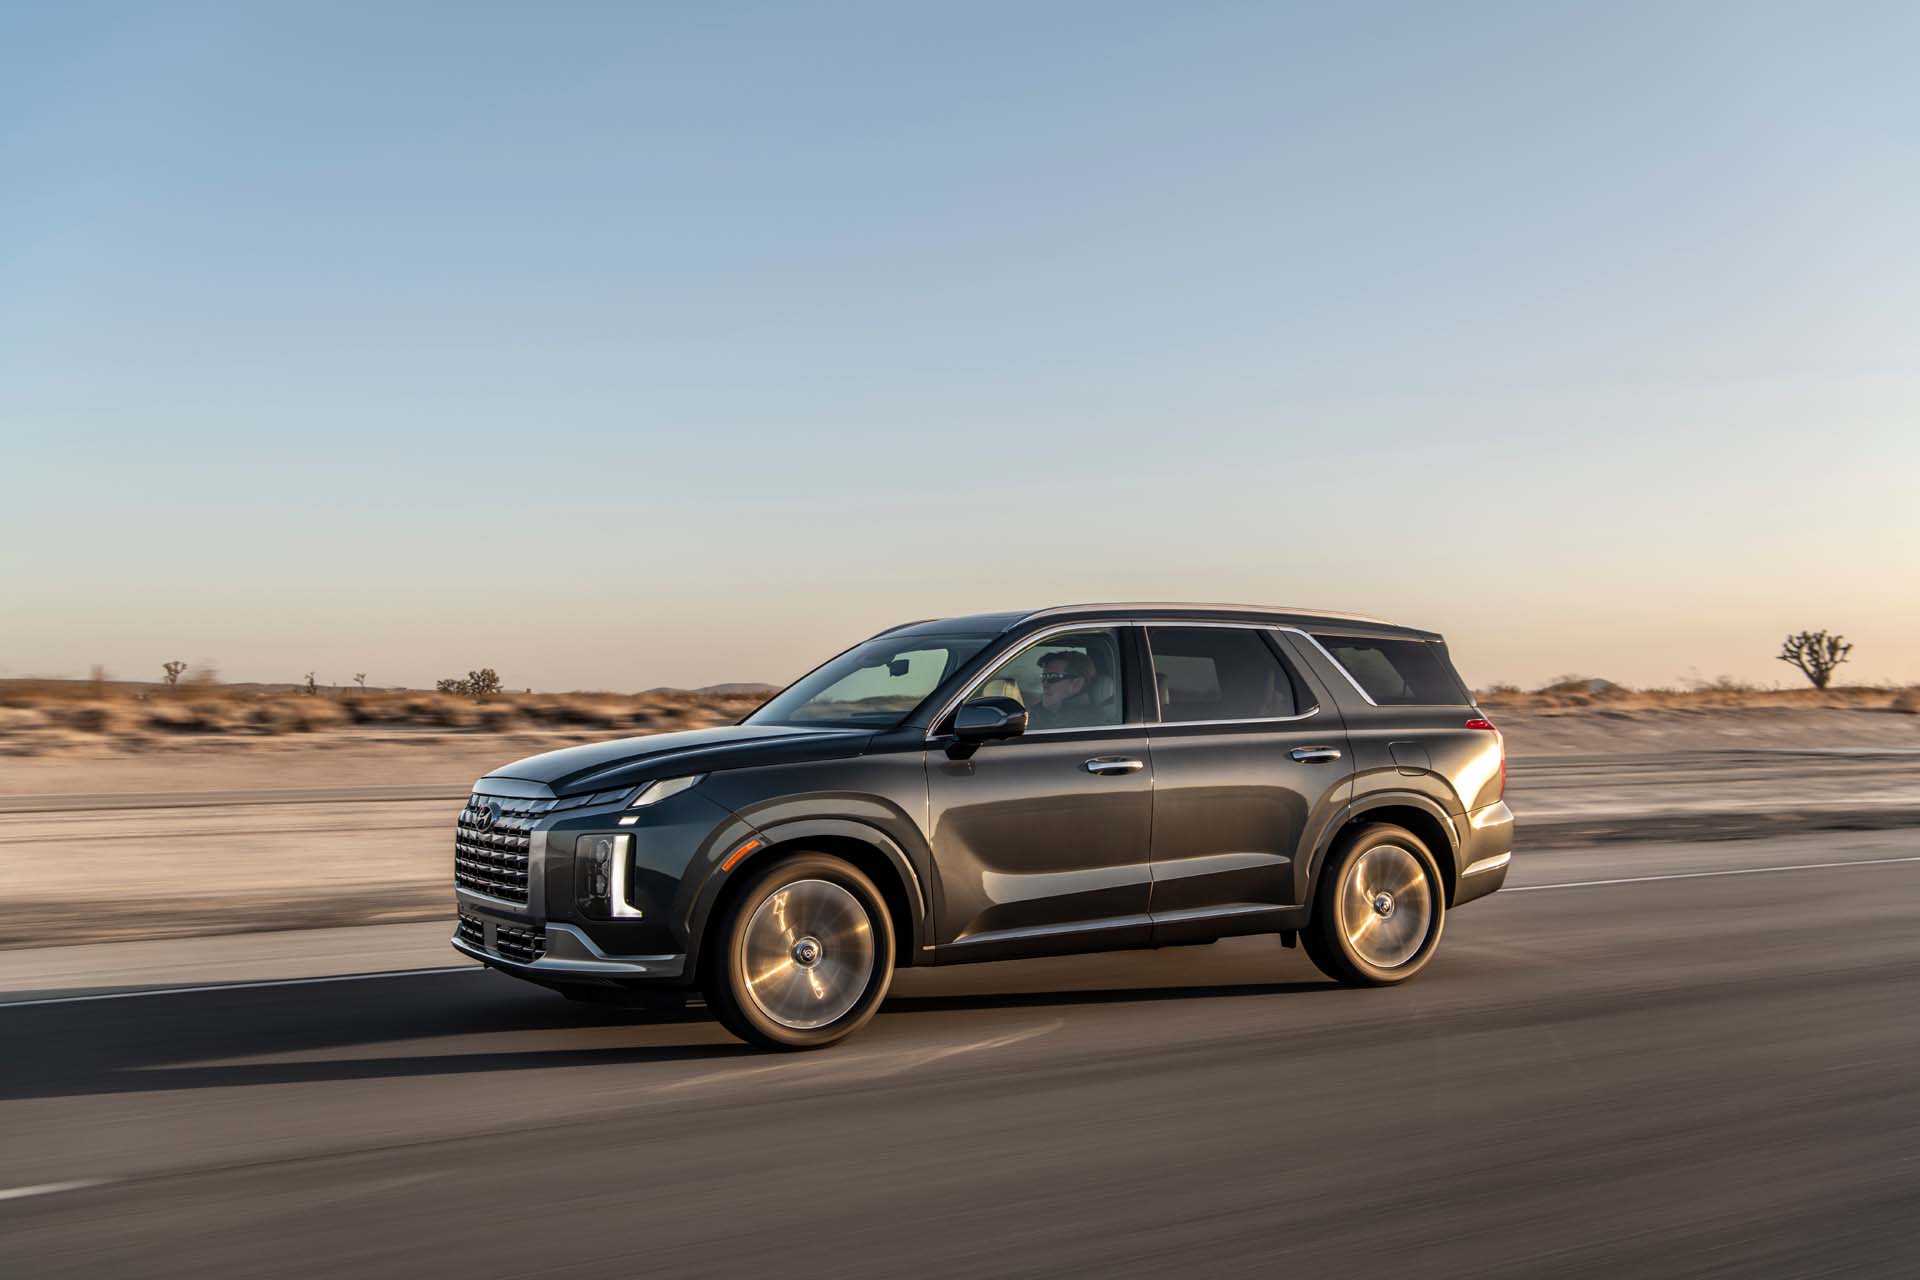 Research the 2023 Hyundai Palisade SUV in Charlotte